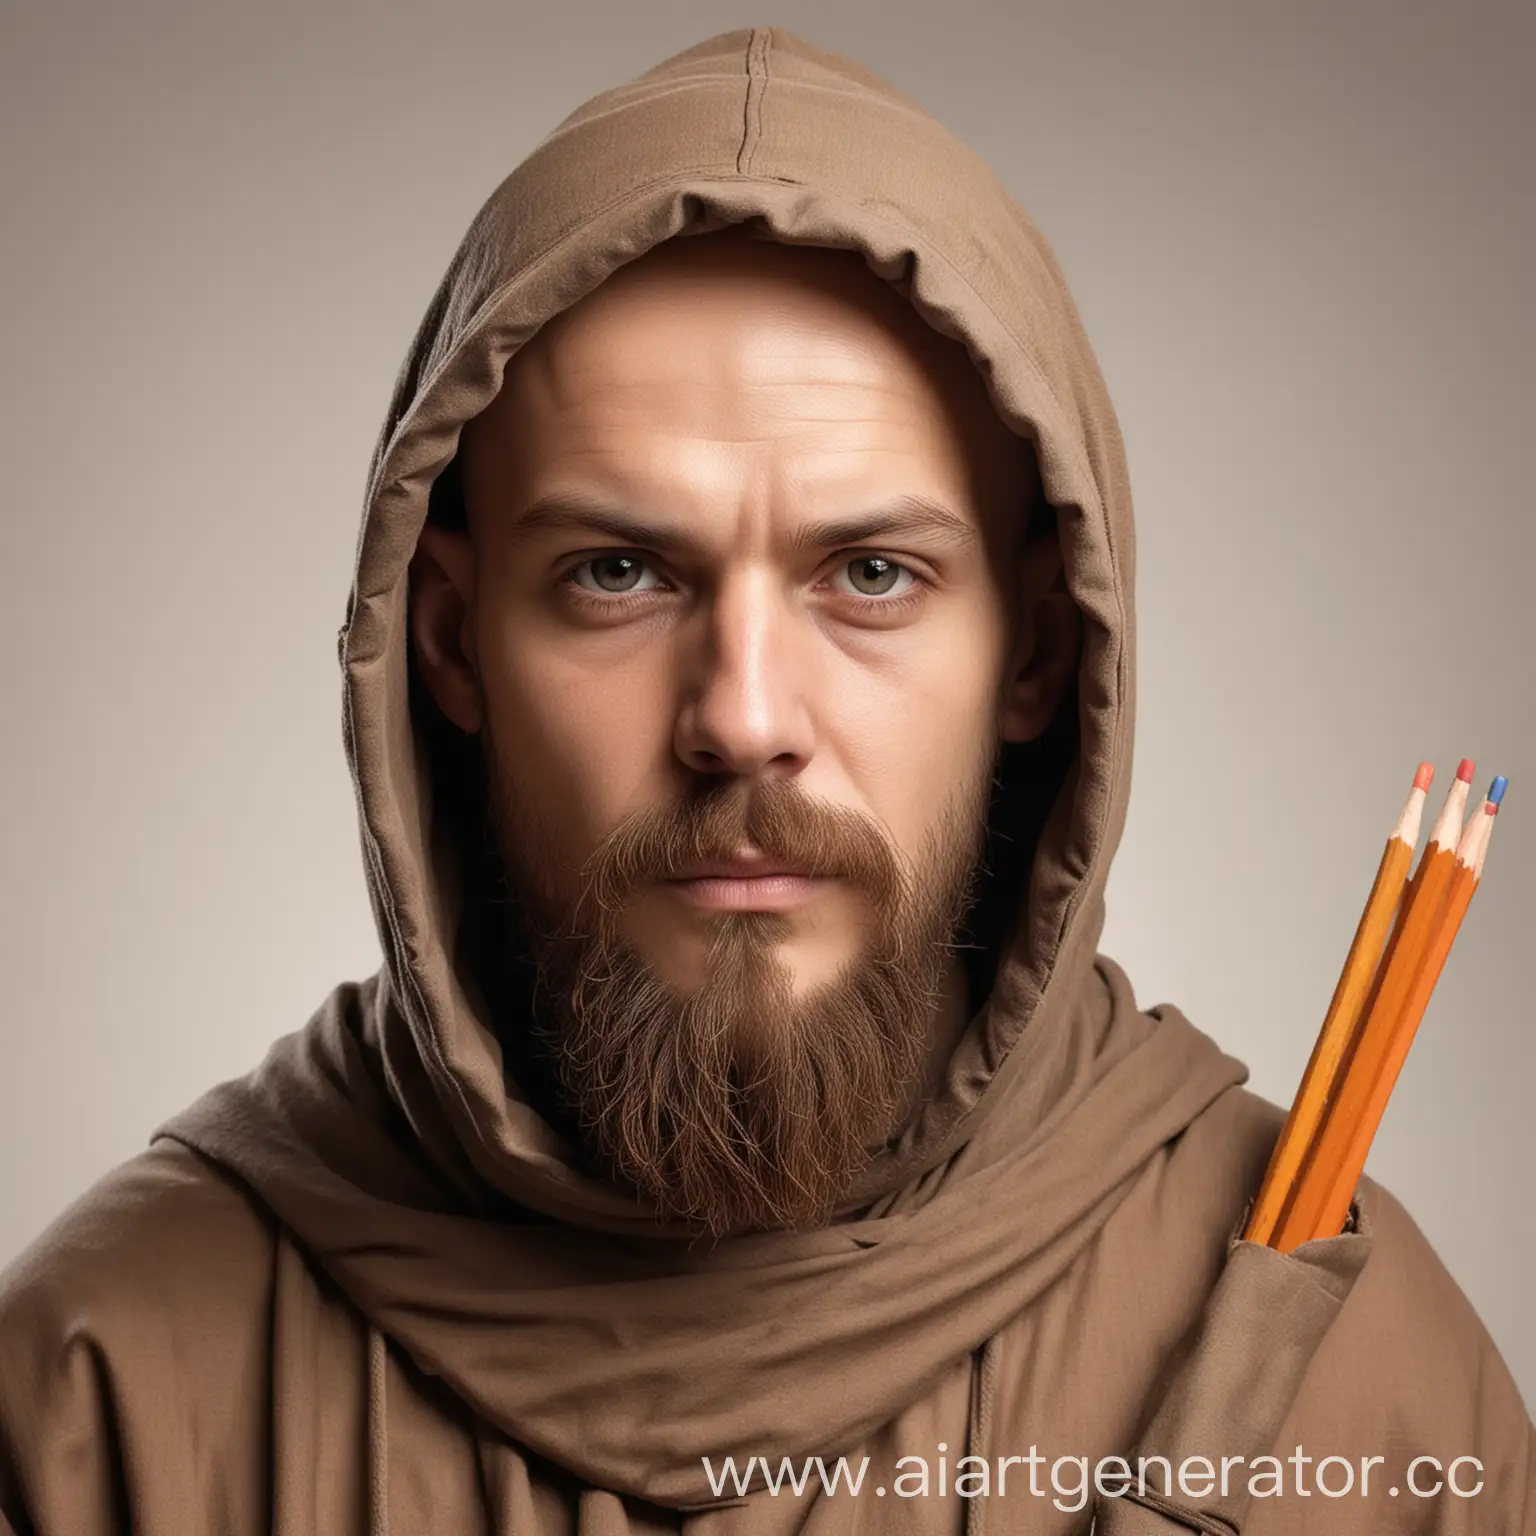 Monk-with-Neutral-Expression-Holding-Pencils-on-Light-Background